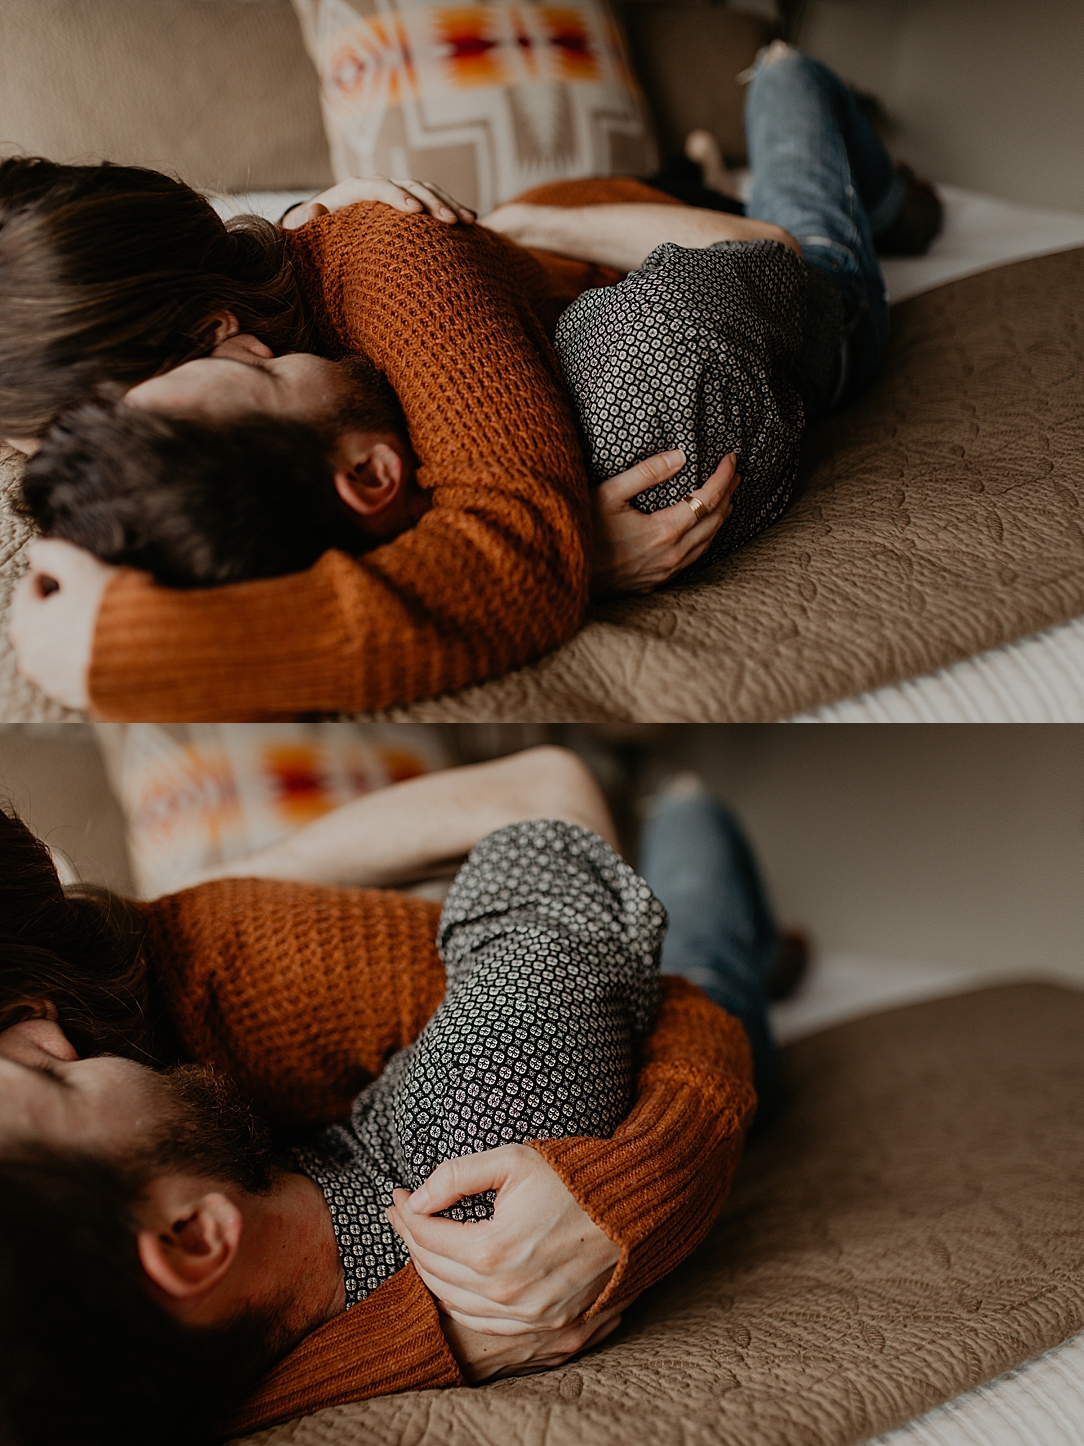 warm & cozy in-home oregon couples session